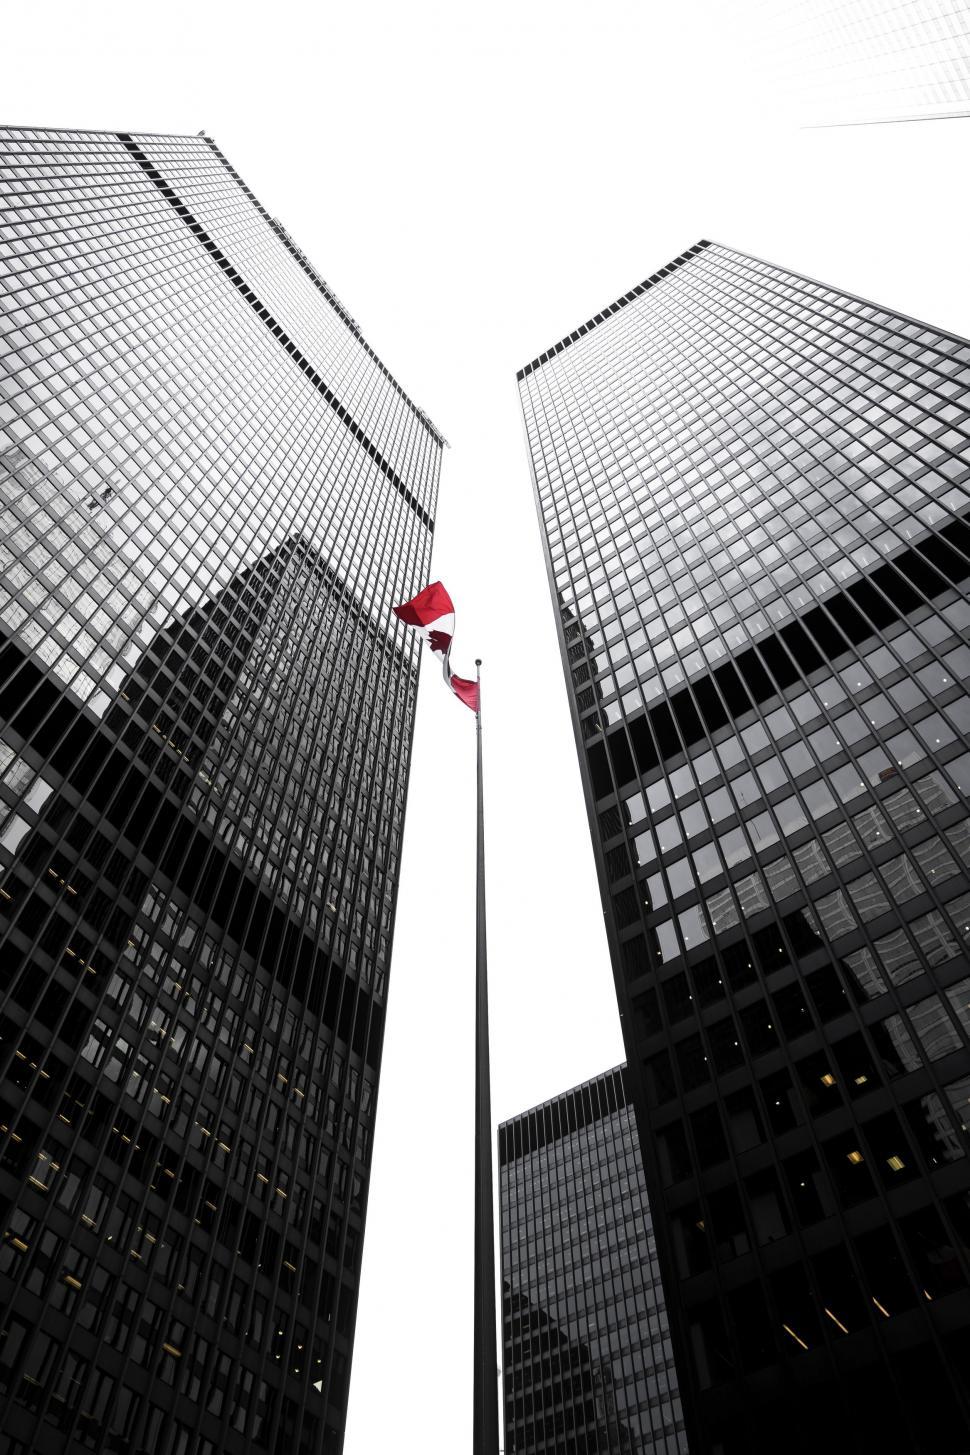 Free Image of Two Tall Buildings With Flag in the Middle 